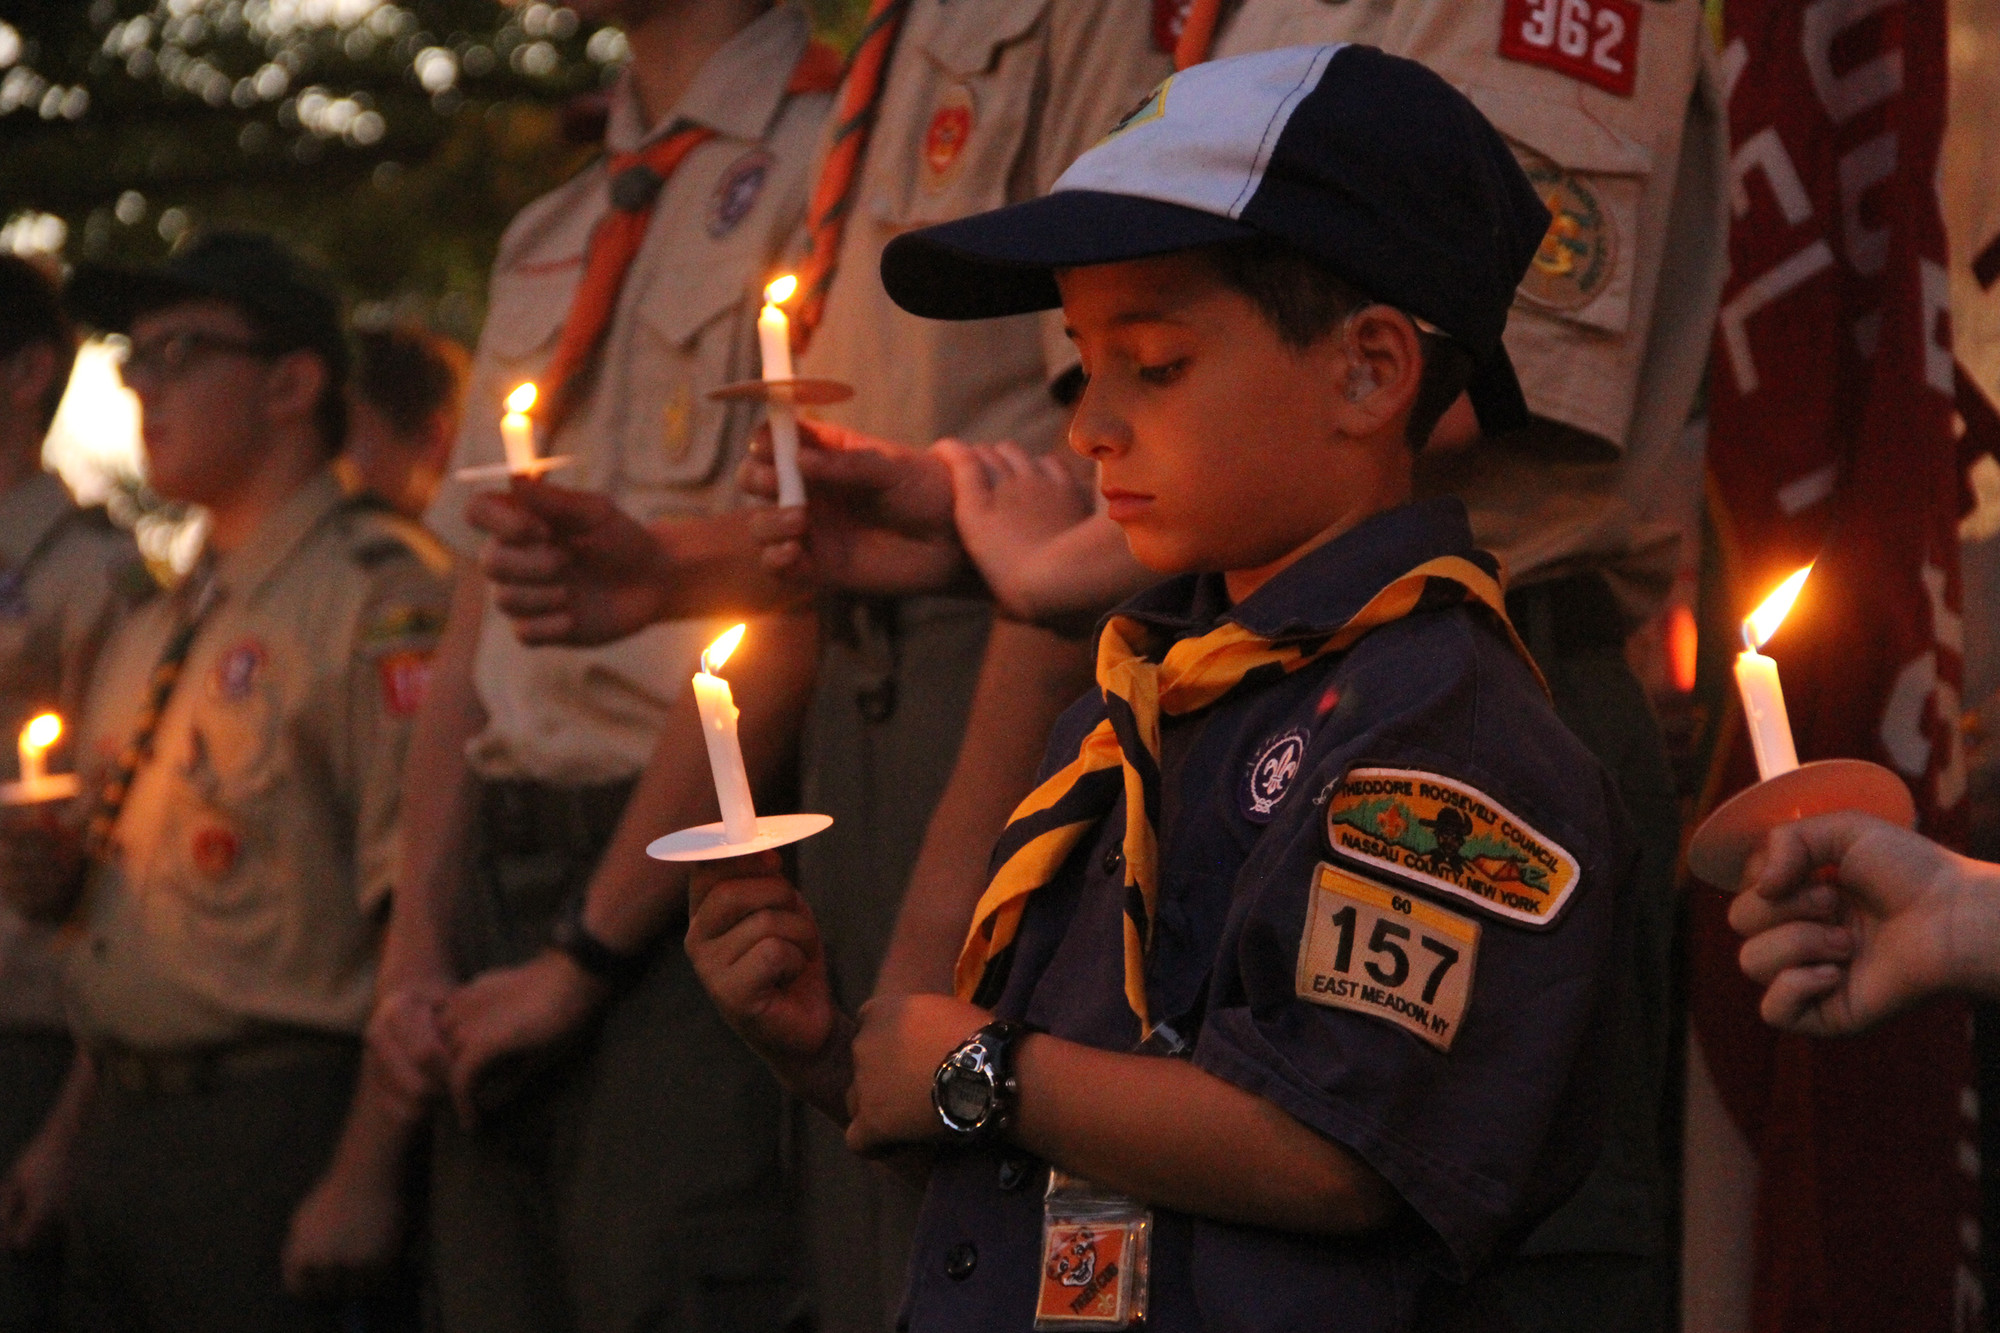 Aaron Schlectman of East Meadow Boy Scout Troop 157 participated in last year's Sept. 11 ceremony at Veterans Memorial Park, hosted annually by the East Meadow Fire Department.